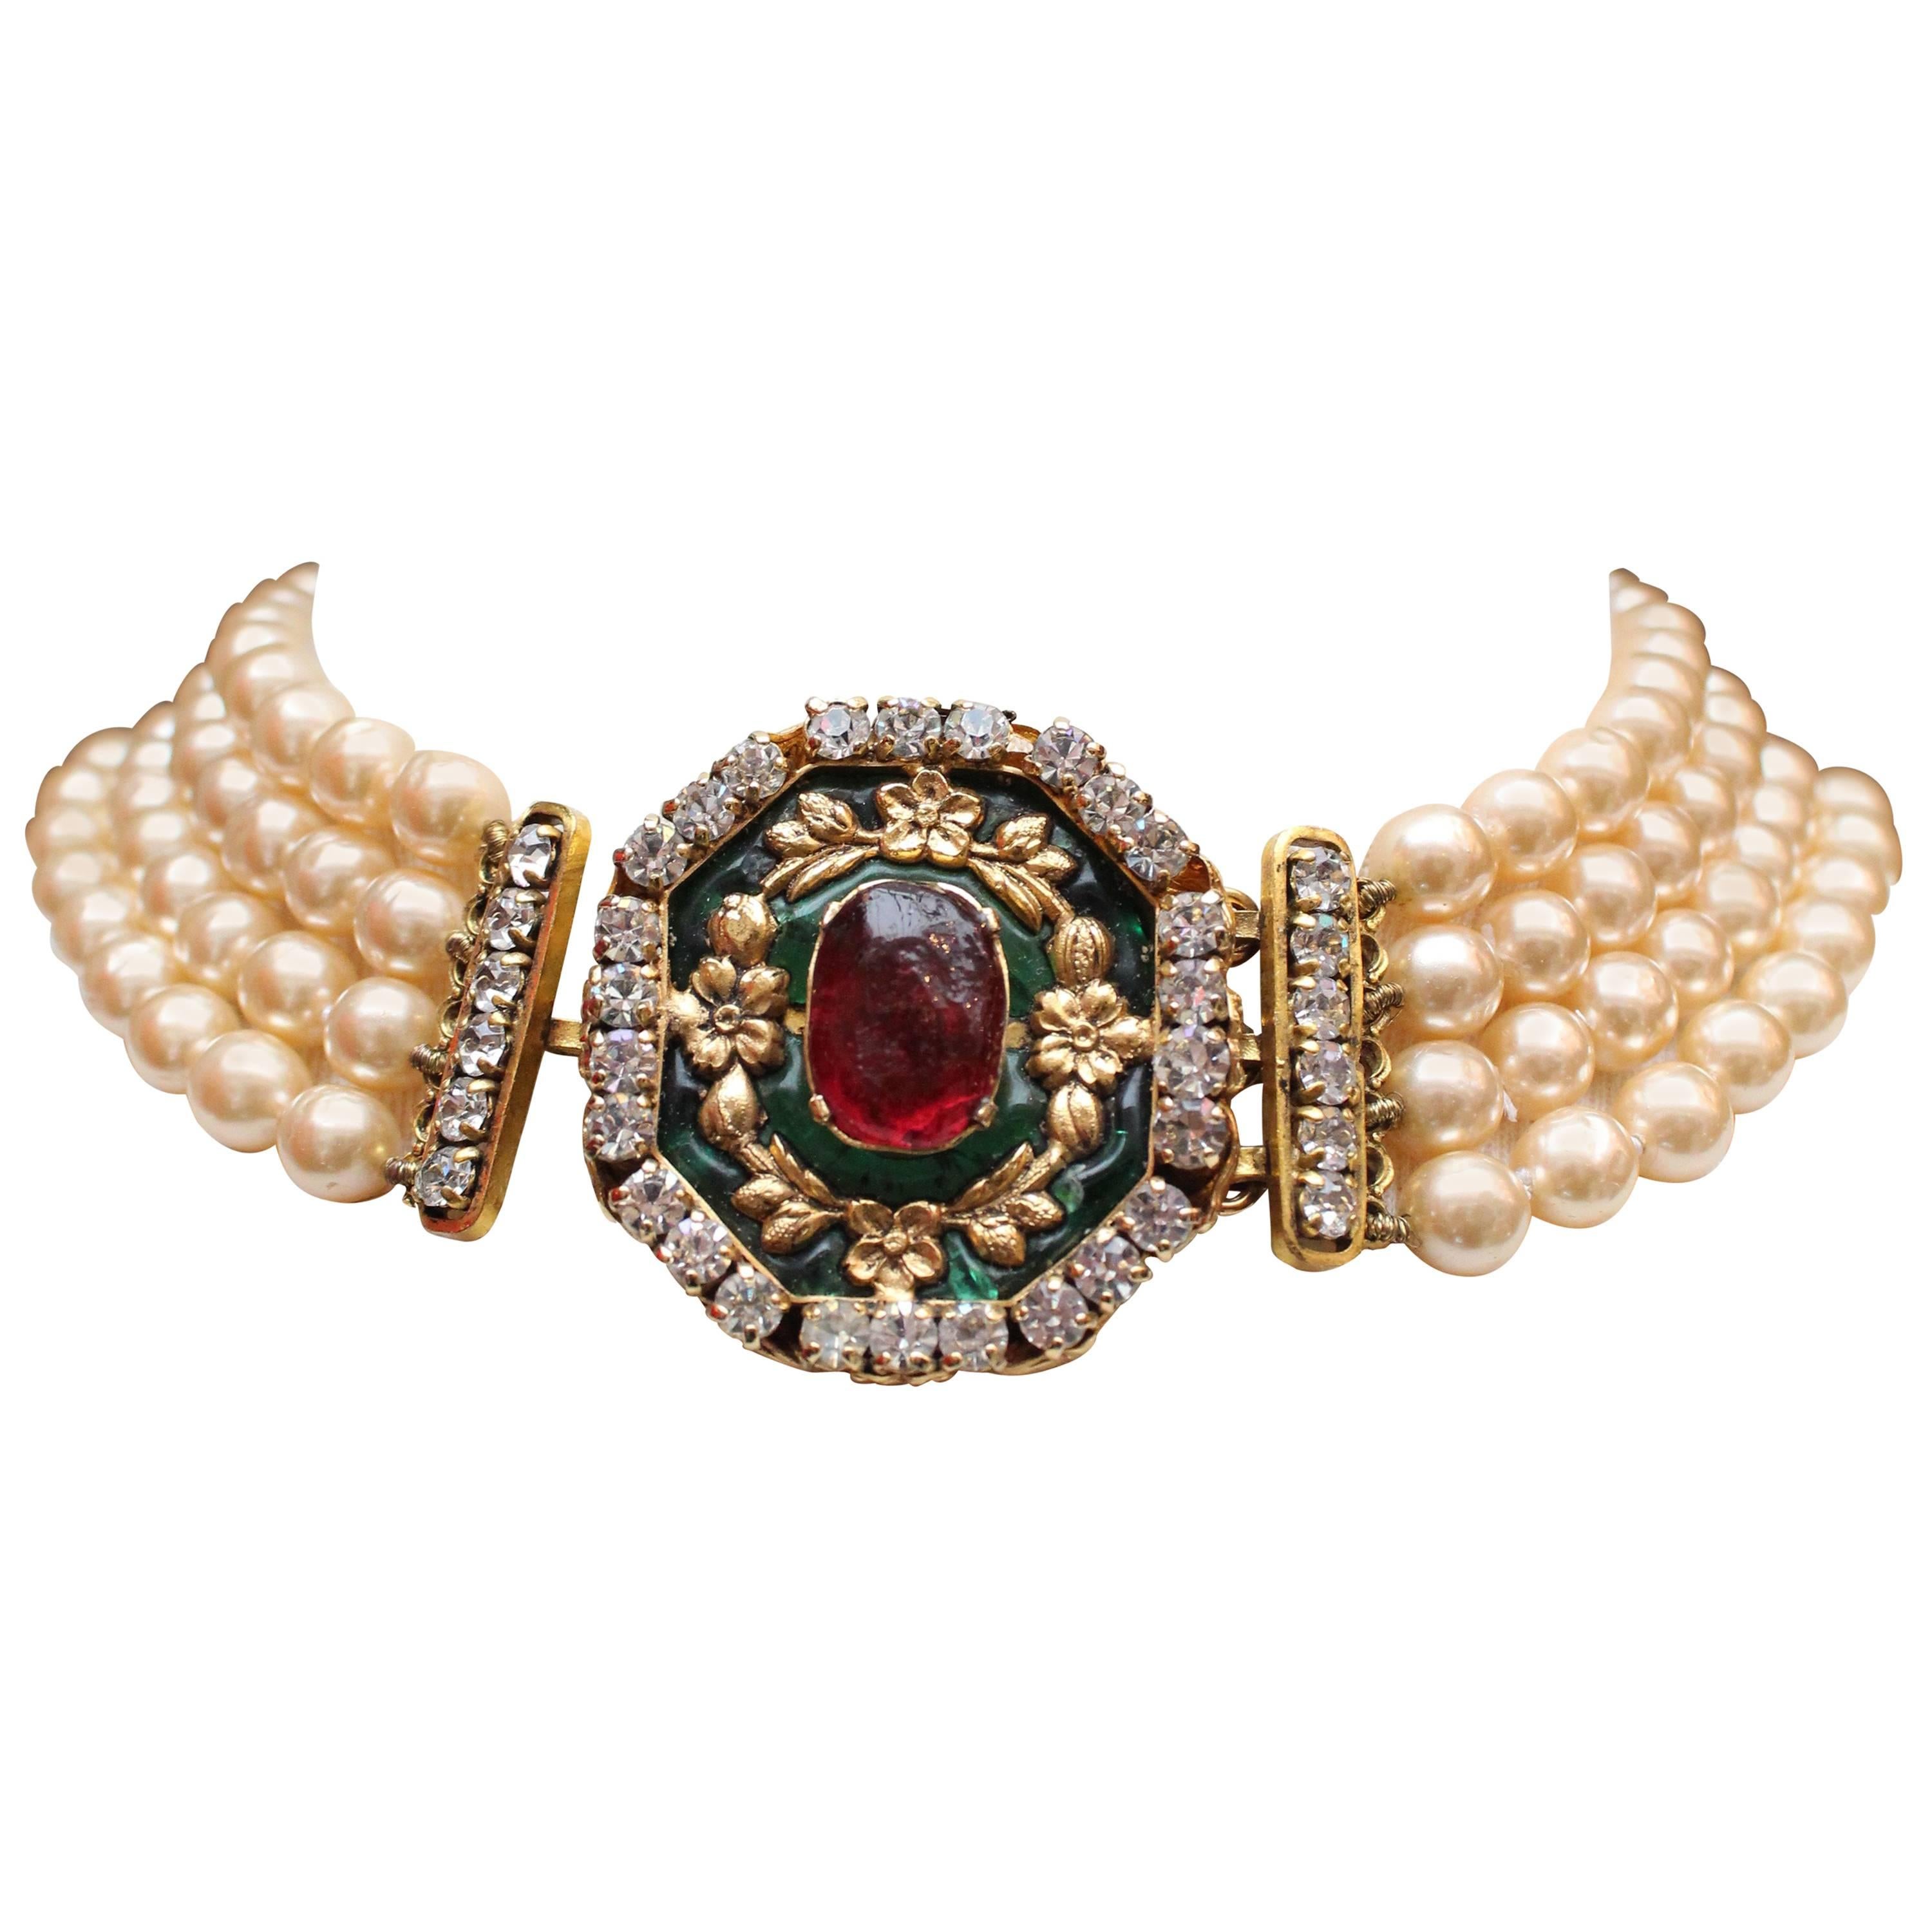 1980s Chanel exceptional faux-pearl choker with Gripoix clasp closure